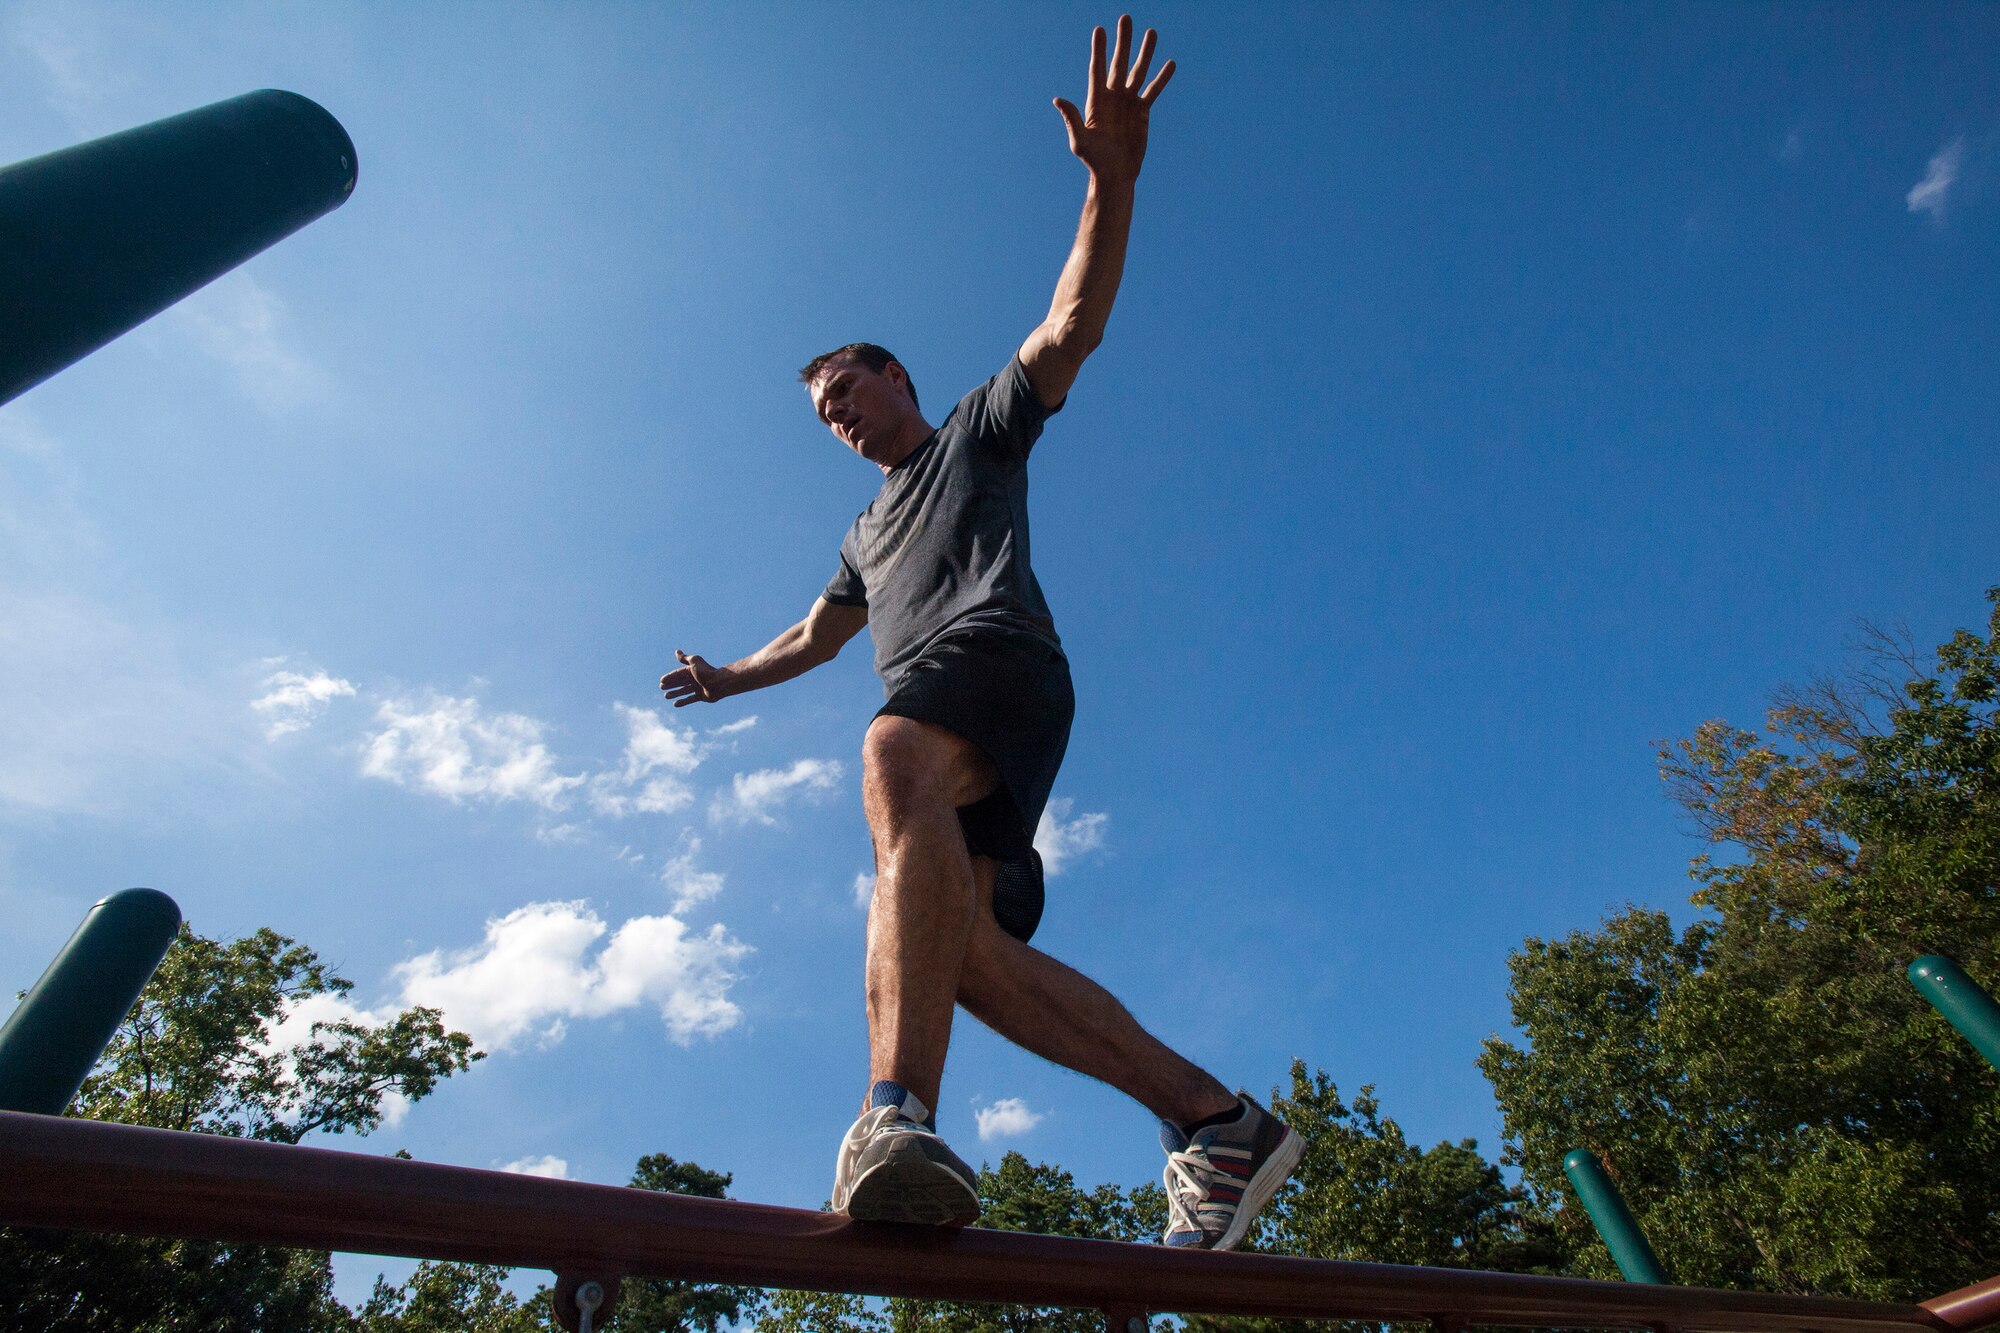 Tech. Sgt. Justin B. Gielski maintains his balance while training to compete on the TV show “American Ninja Warrior” at a playground near his home in Medford, N.J., Aug. 21, 2015. Gielski placed fifth in the all-military city final on the TV show and advanced to the finals in Las Vegas. Gielski is a loadmaster with the 150th Special Operations Squadron, 108th Wing, New Jersey Air National Guard, located at Joint Base McGuire-Dix-Lakehurst, N.J. (U.S. Air National Guard photo by Master Sgt. Mark C. Olsen/Released)